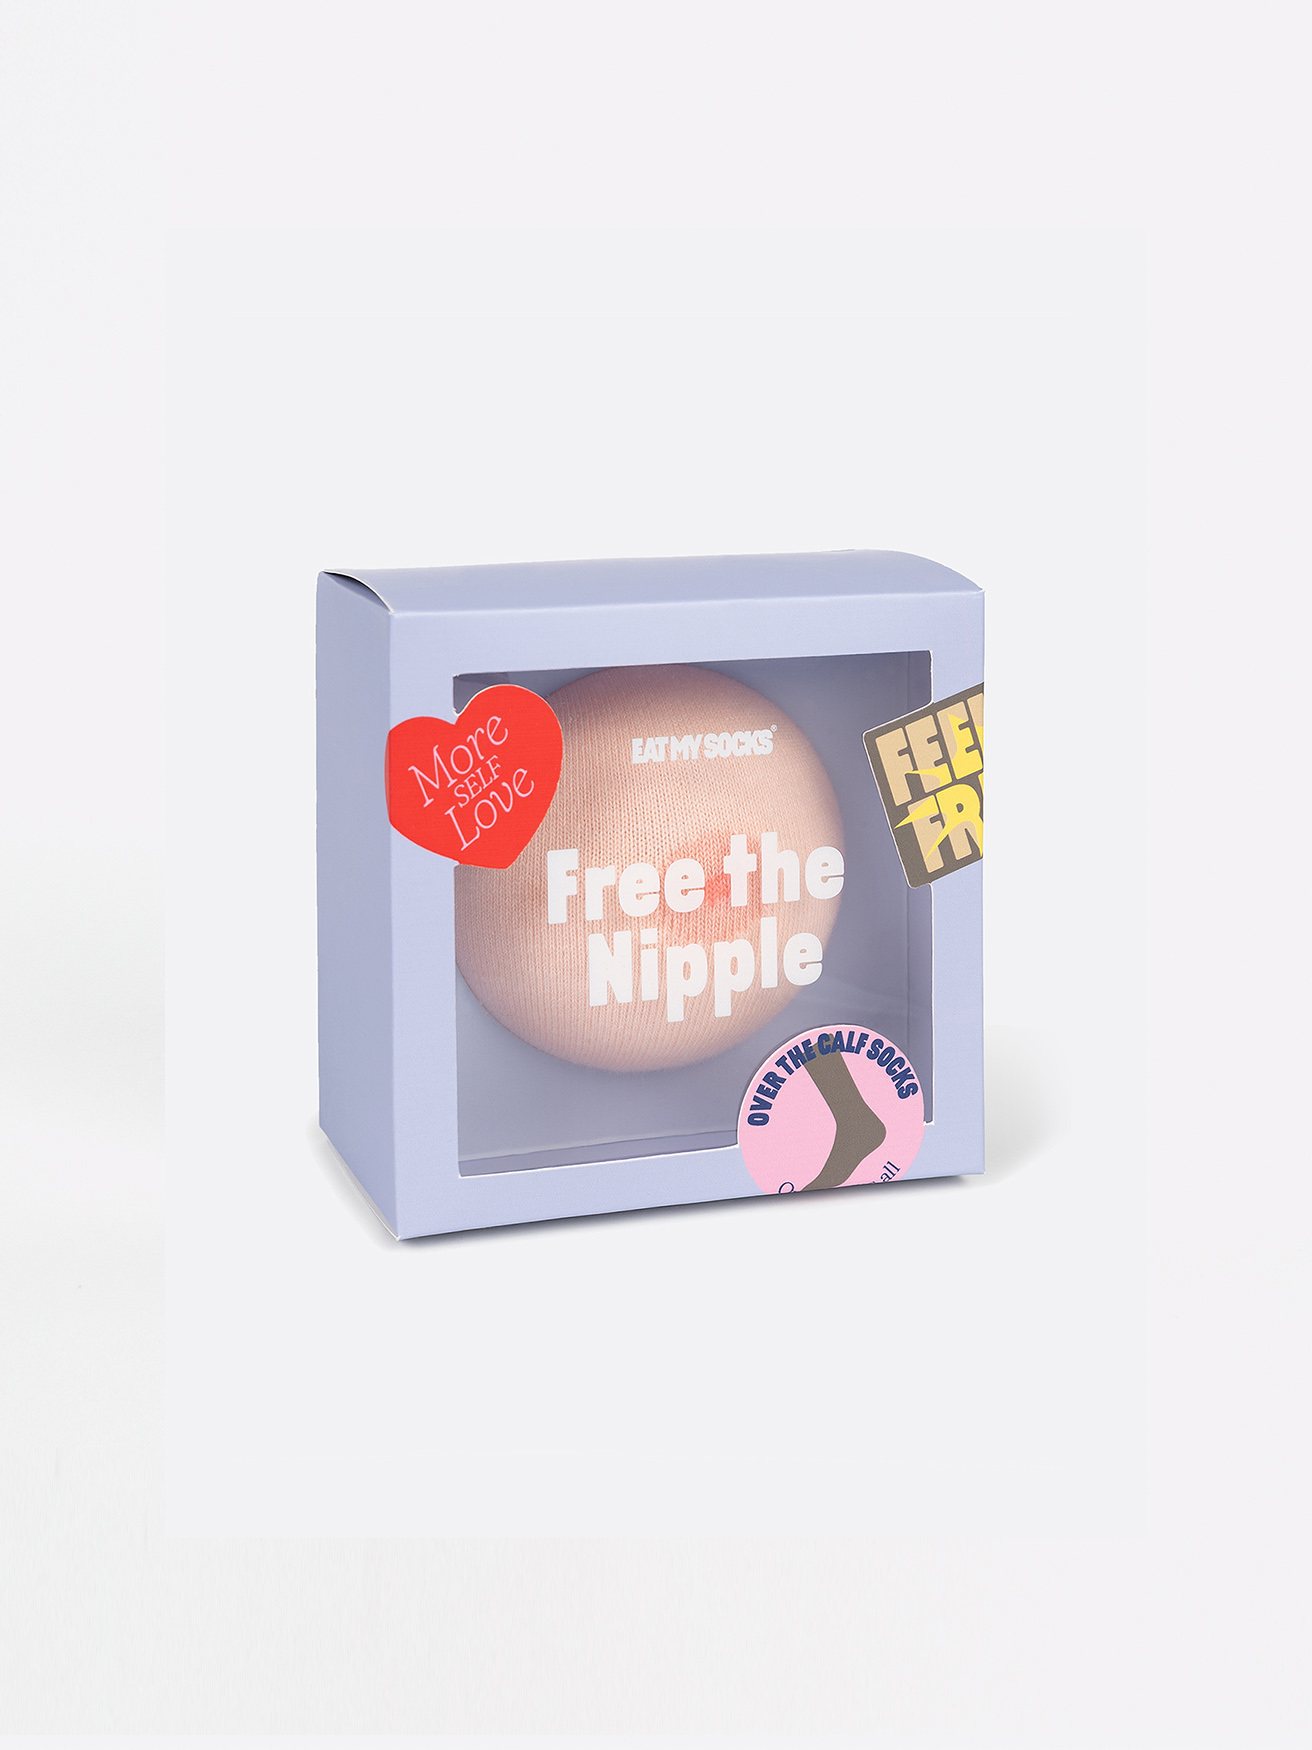 Eat My Socks - Free the Nipple - white - One size - Gadgets